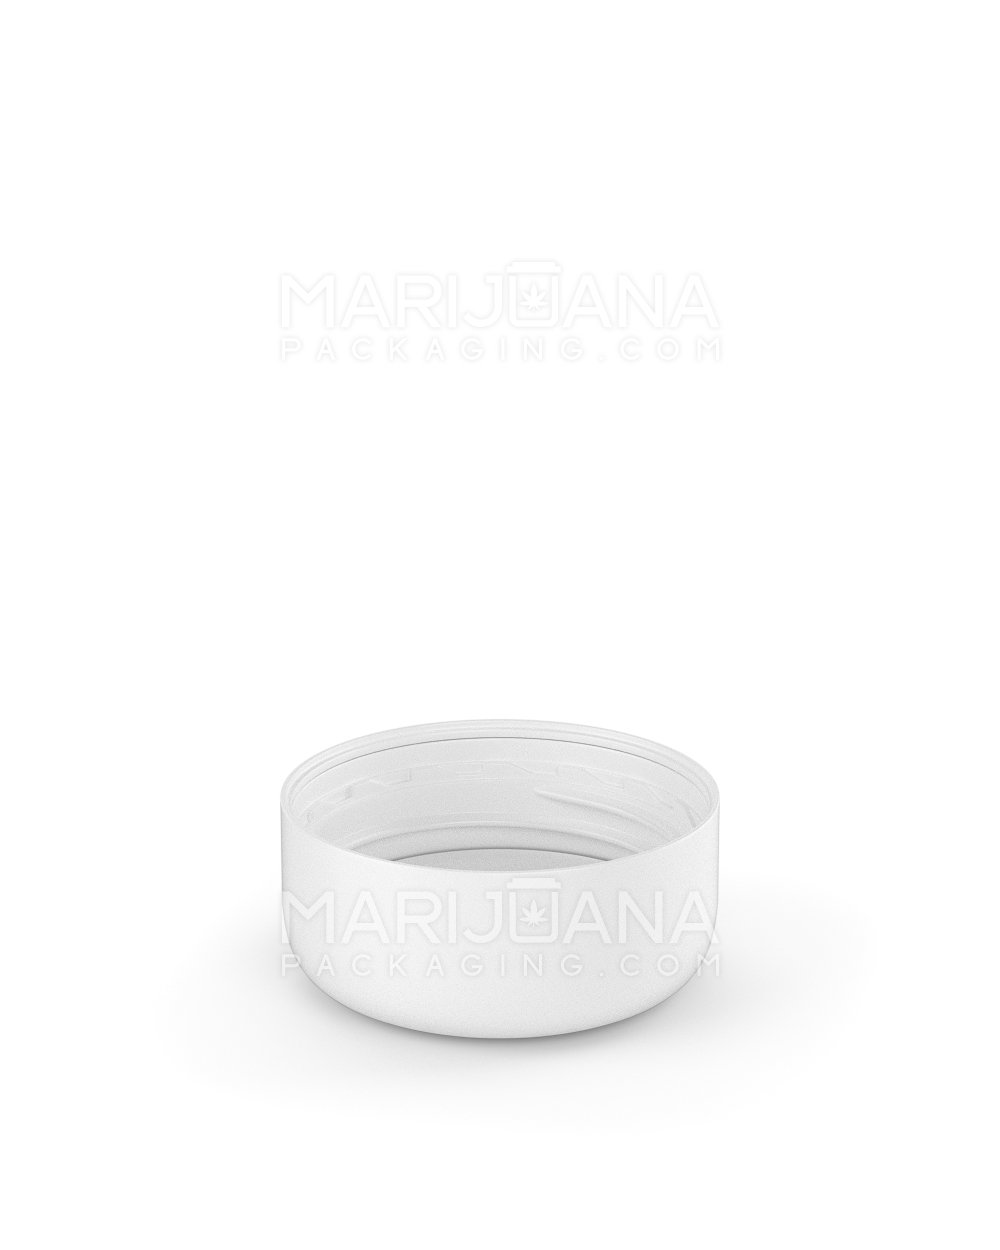 Child Resistant | Smooth Push Down & Turn Plastic Caps w/ Foam Liner | 29mm - Semi Gloss White - 504 Count - 4